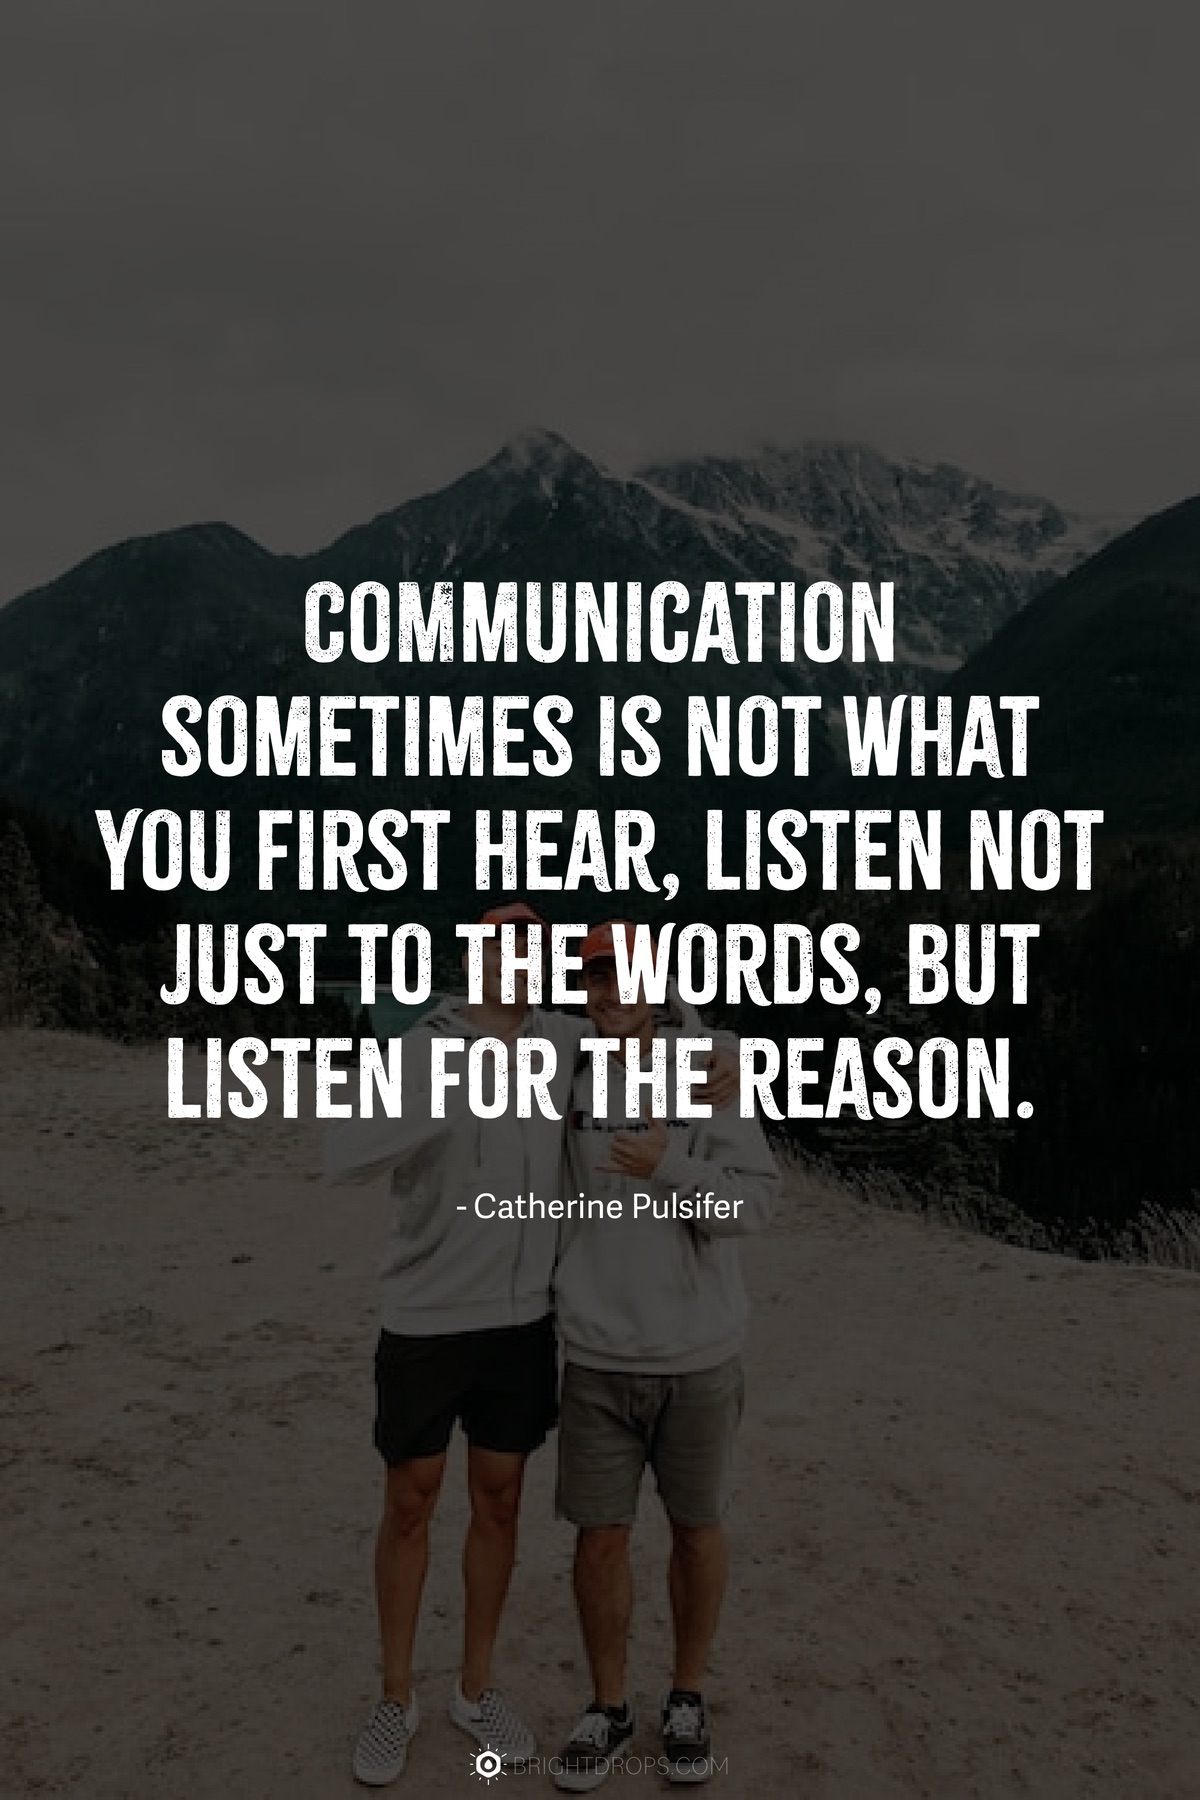 Communication sometimes is not what you first hear, listen not just to the words, but listen for the reason.